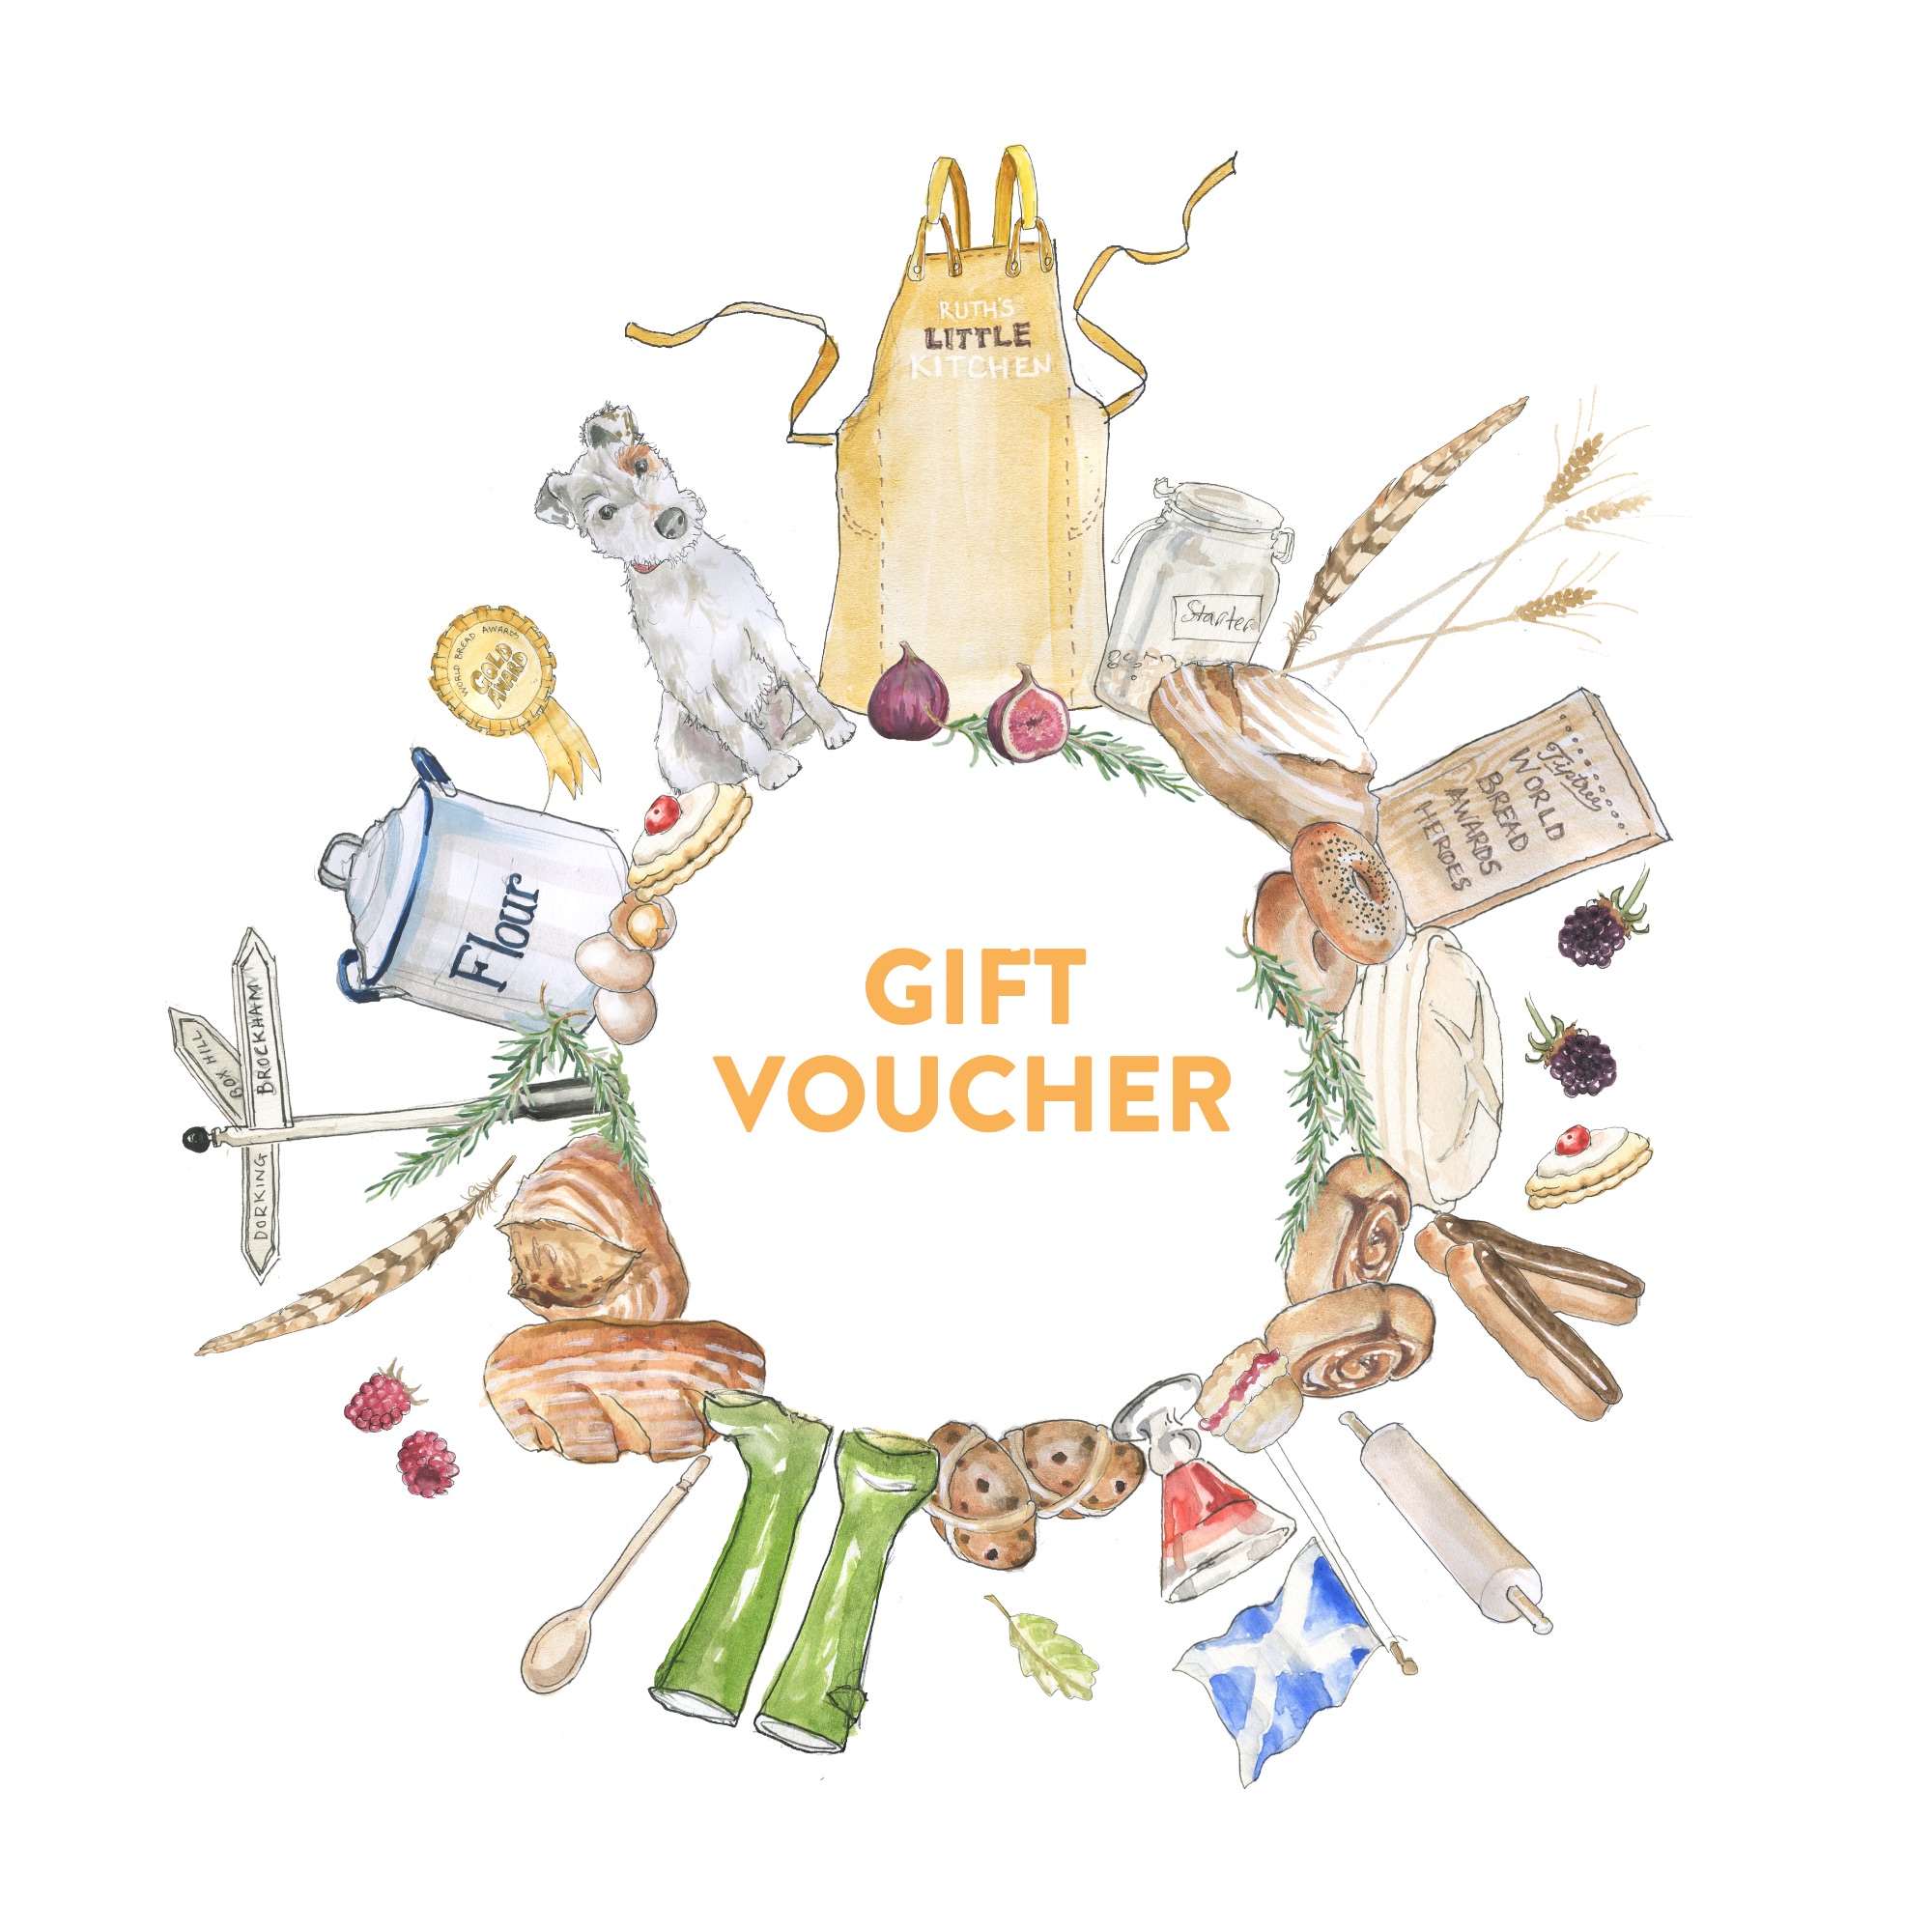 ruth gift voucher square